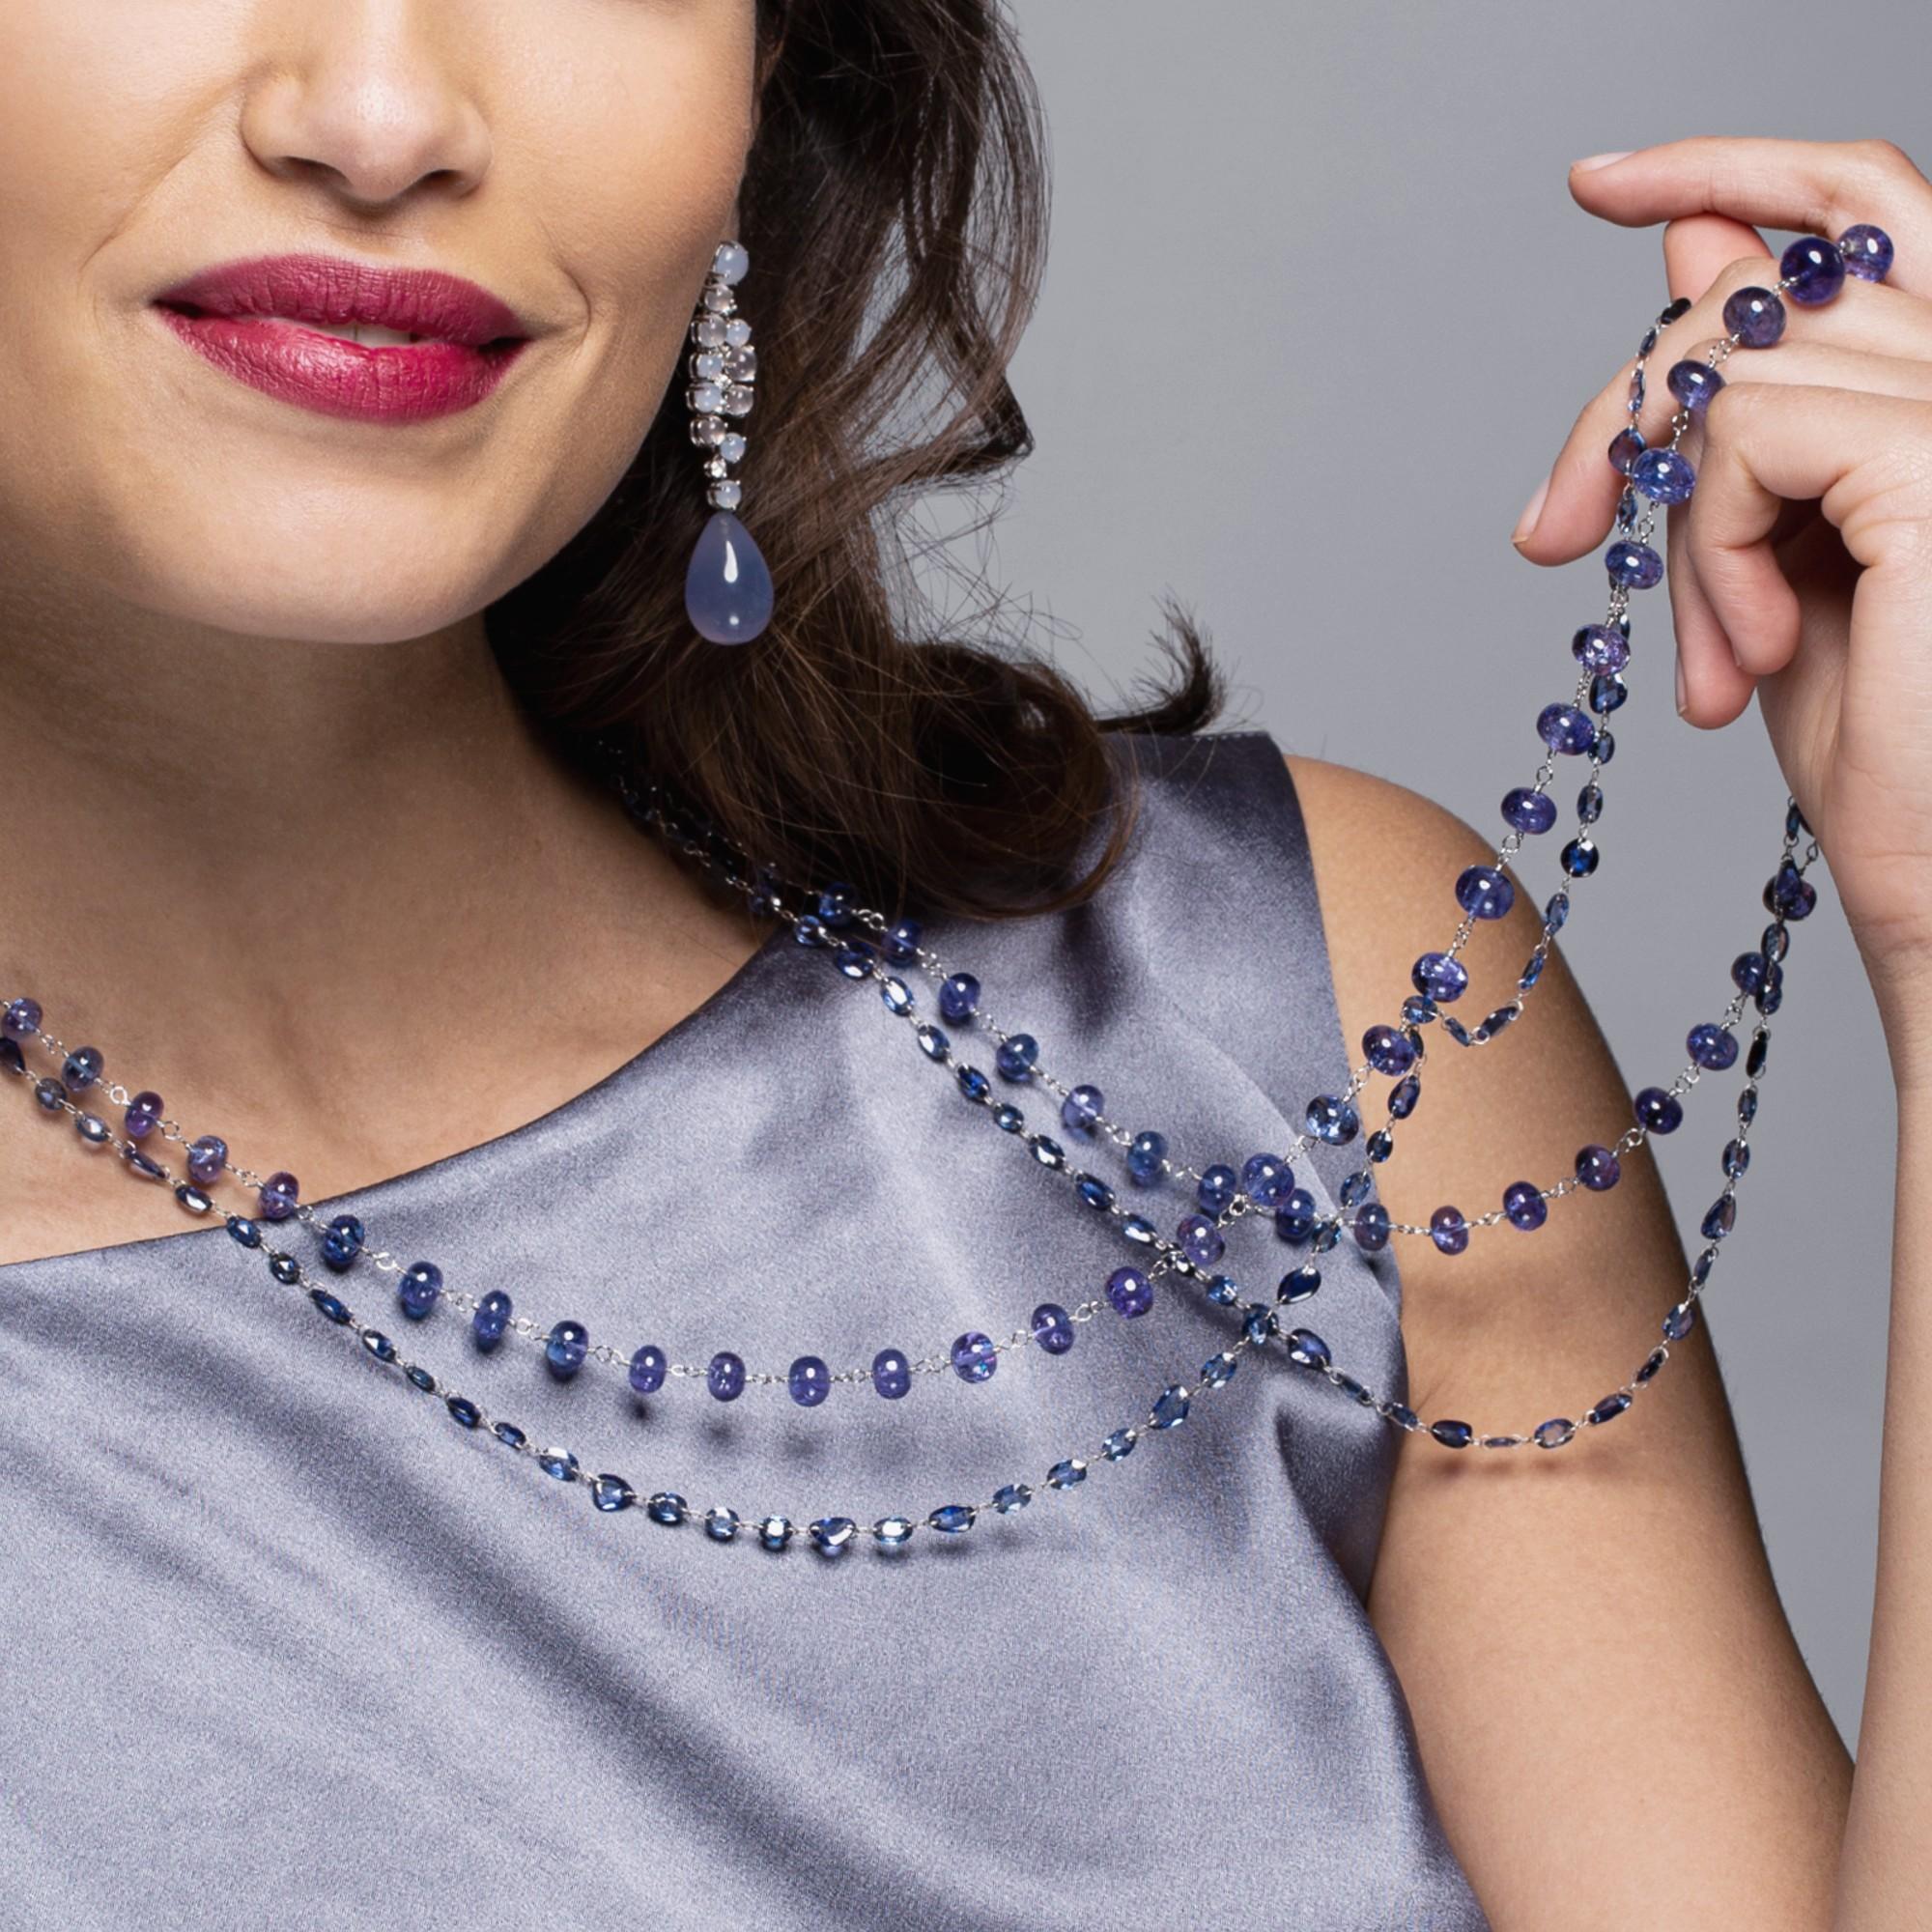 Alex Jona design collection, hand crafted in Italy, 39.37 inch -100 cm long necklace, featuring 64.44 carats of  flat cut blue sapphires, drilled and linked in 18 Karat white gold.
Alex Jona jewels stand out, not only for their special design and